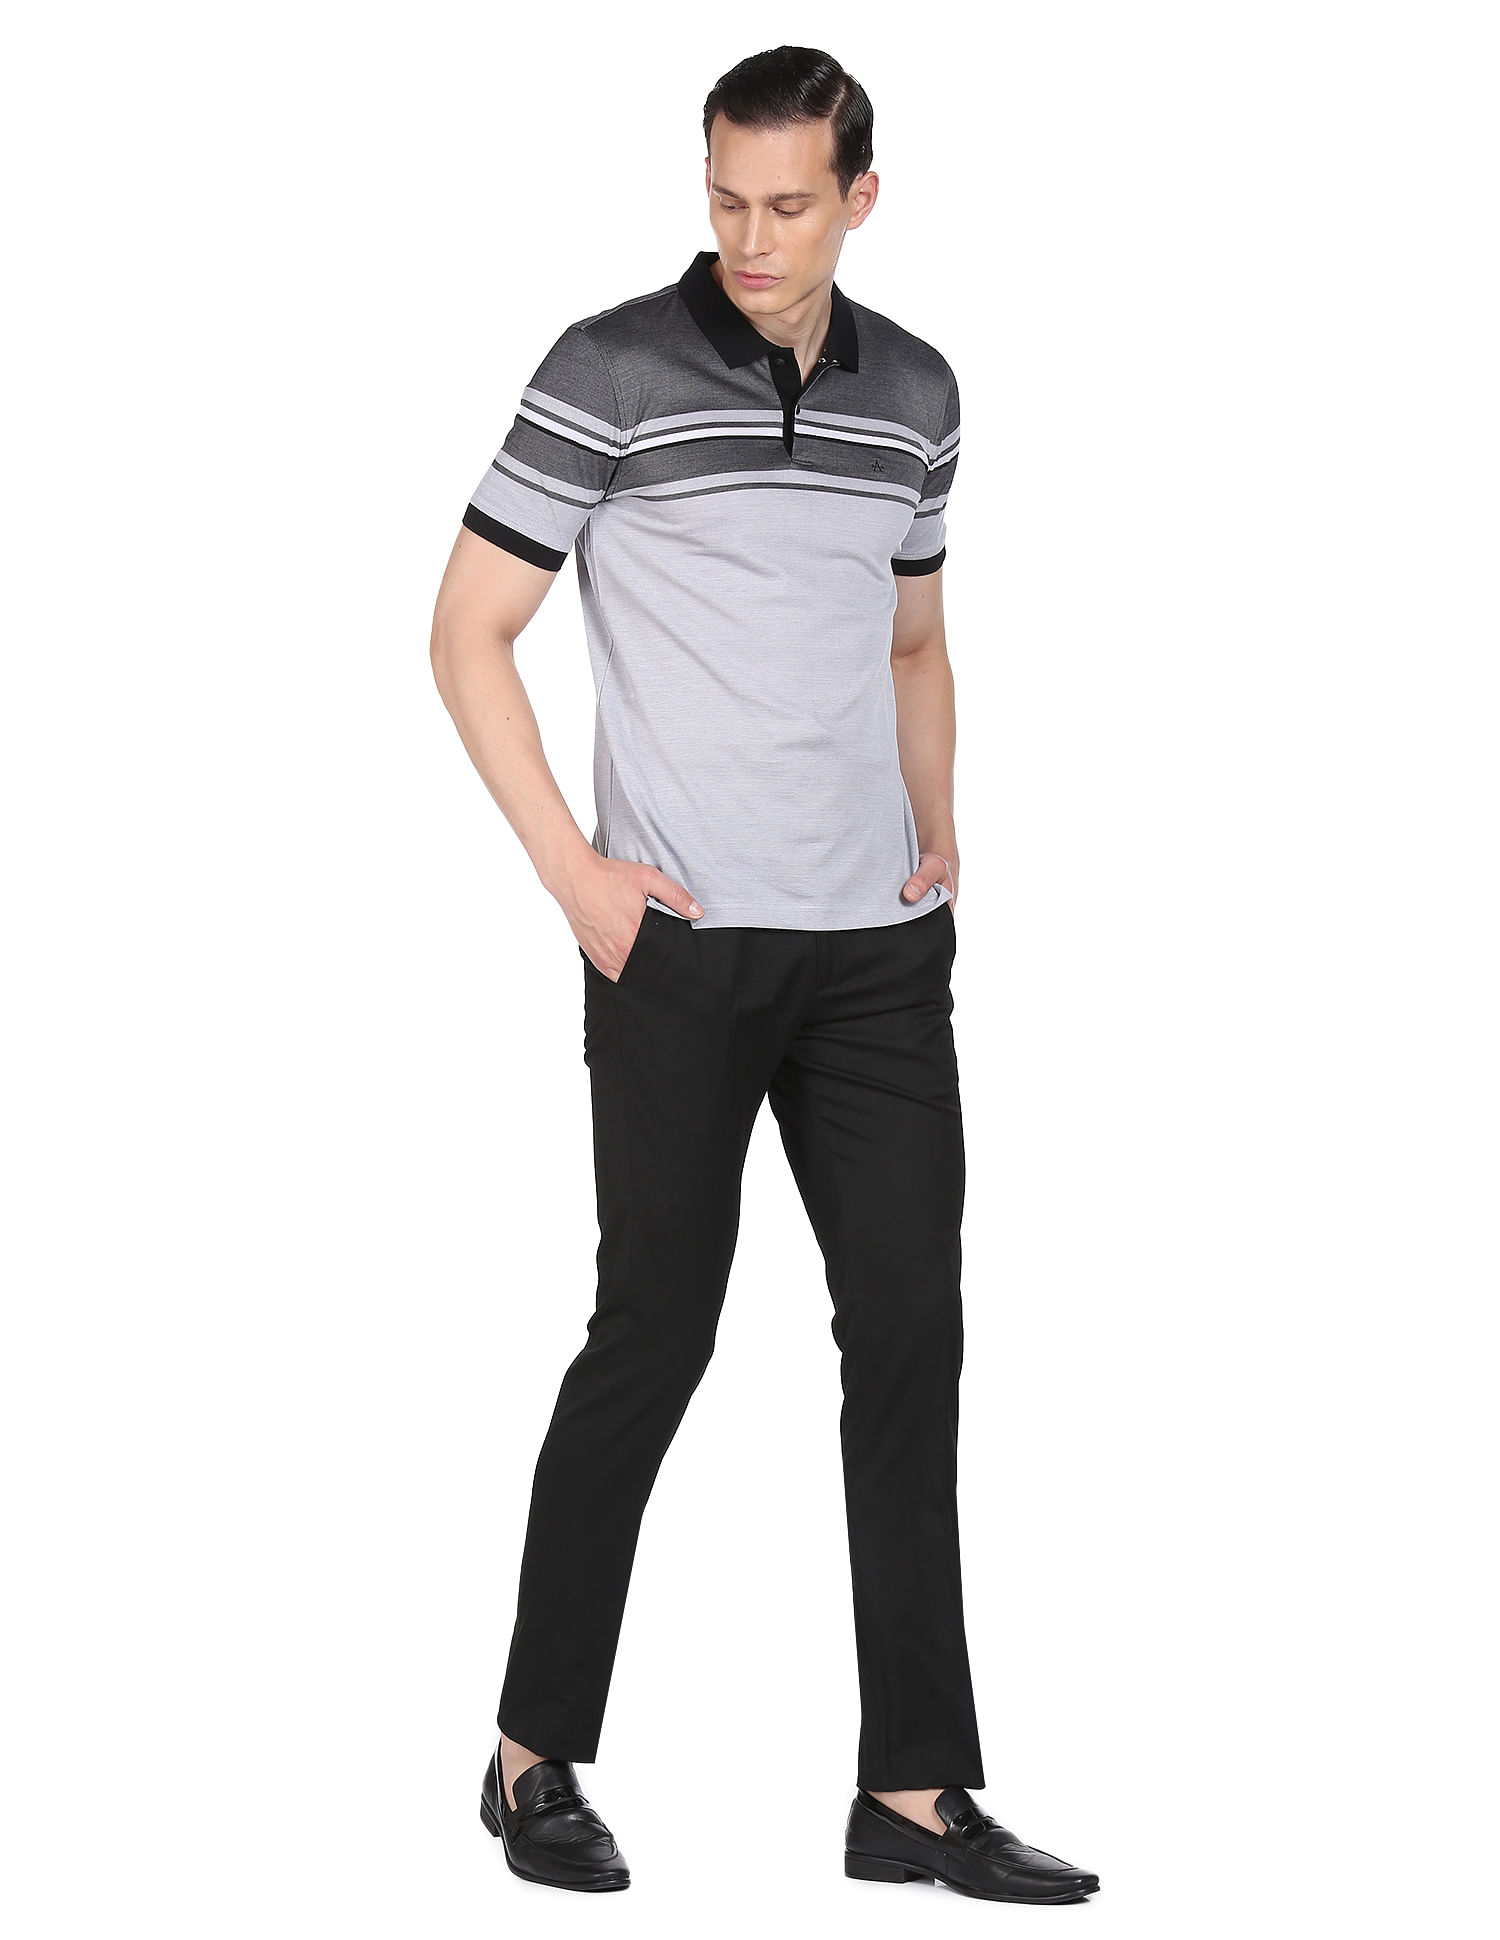 Black Polo with Charcoal Pants Outfits For Men 61 ideas  outfits   Lookastic